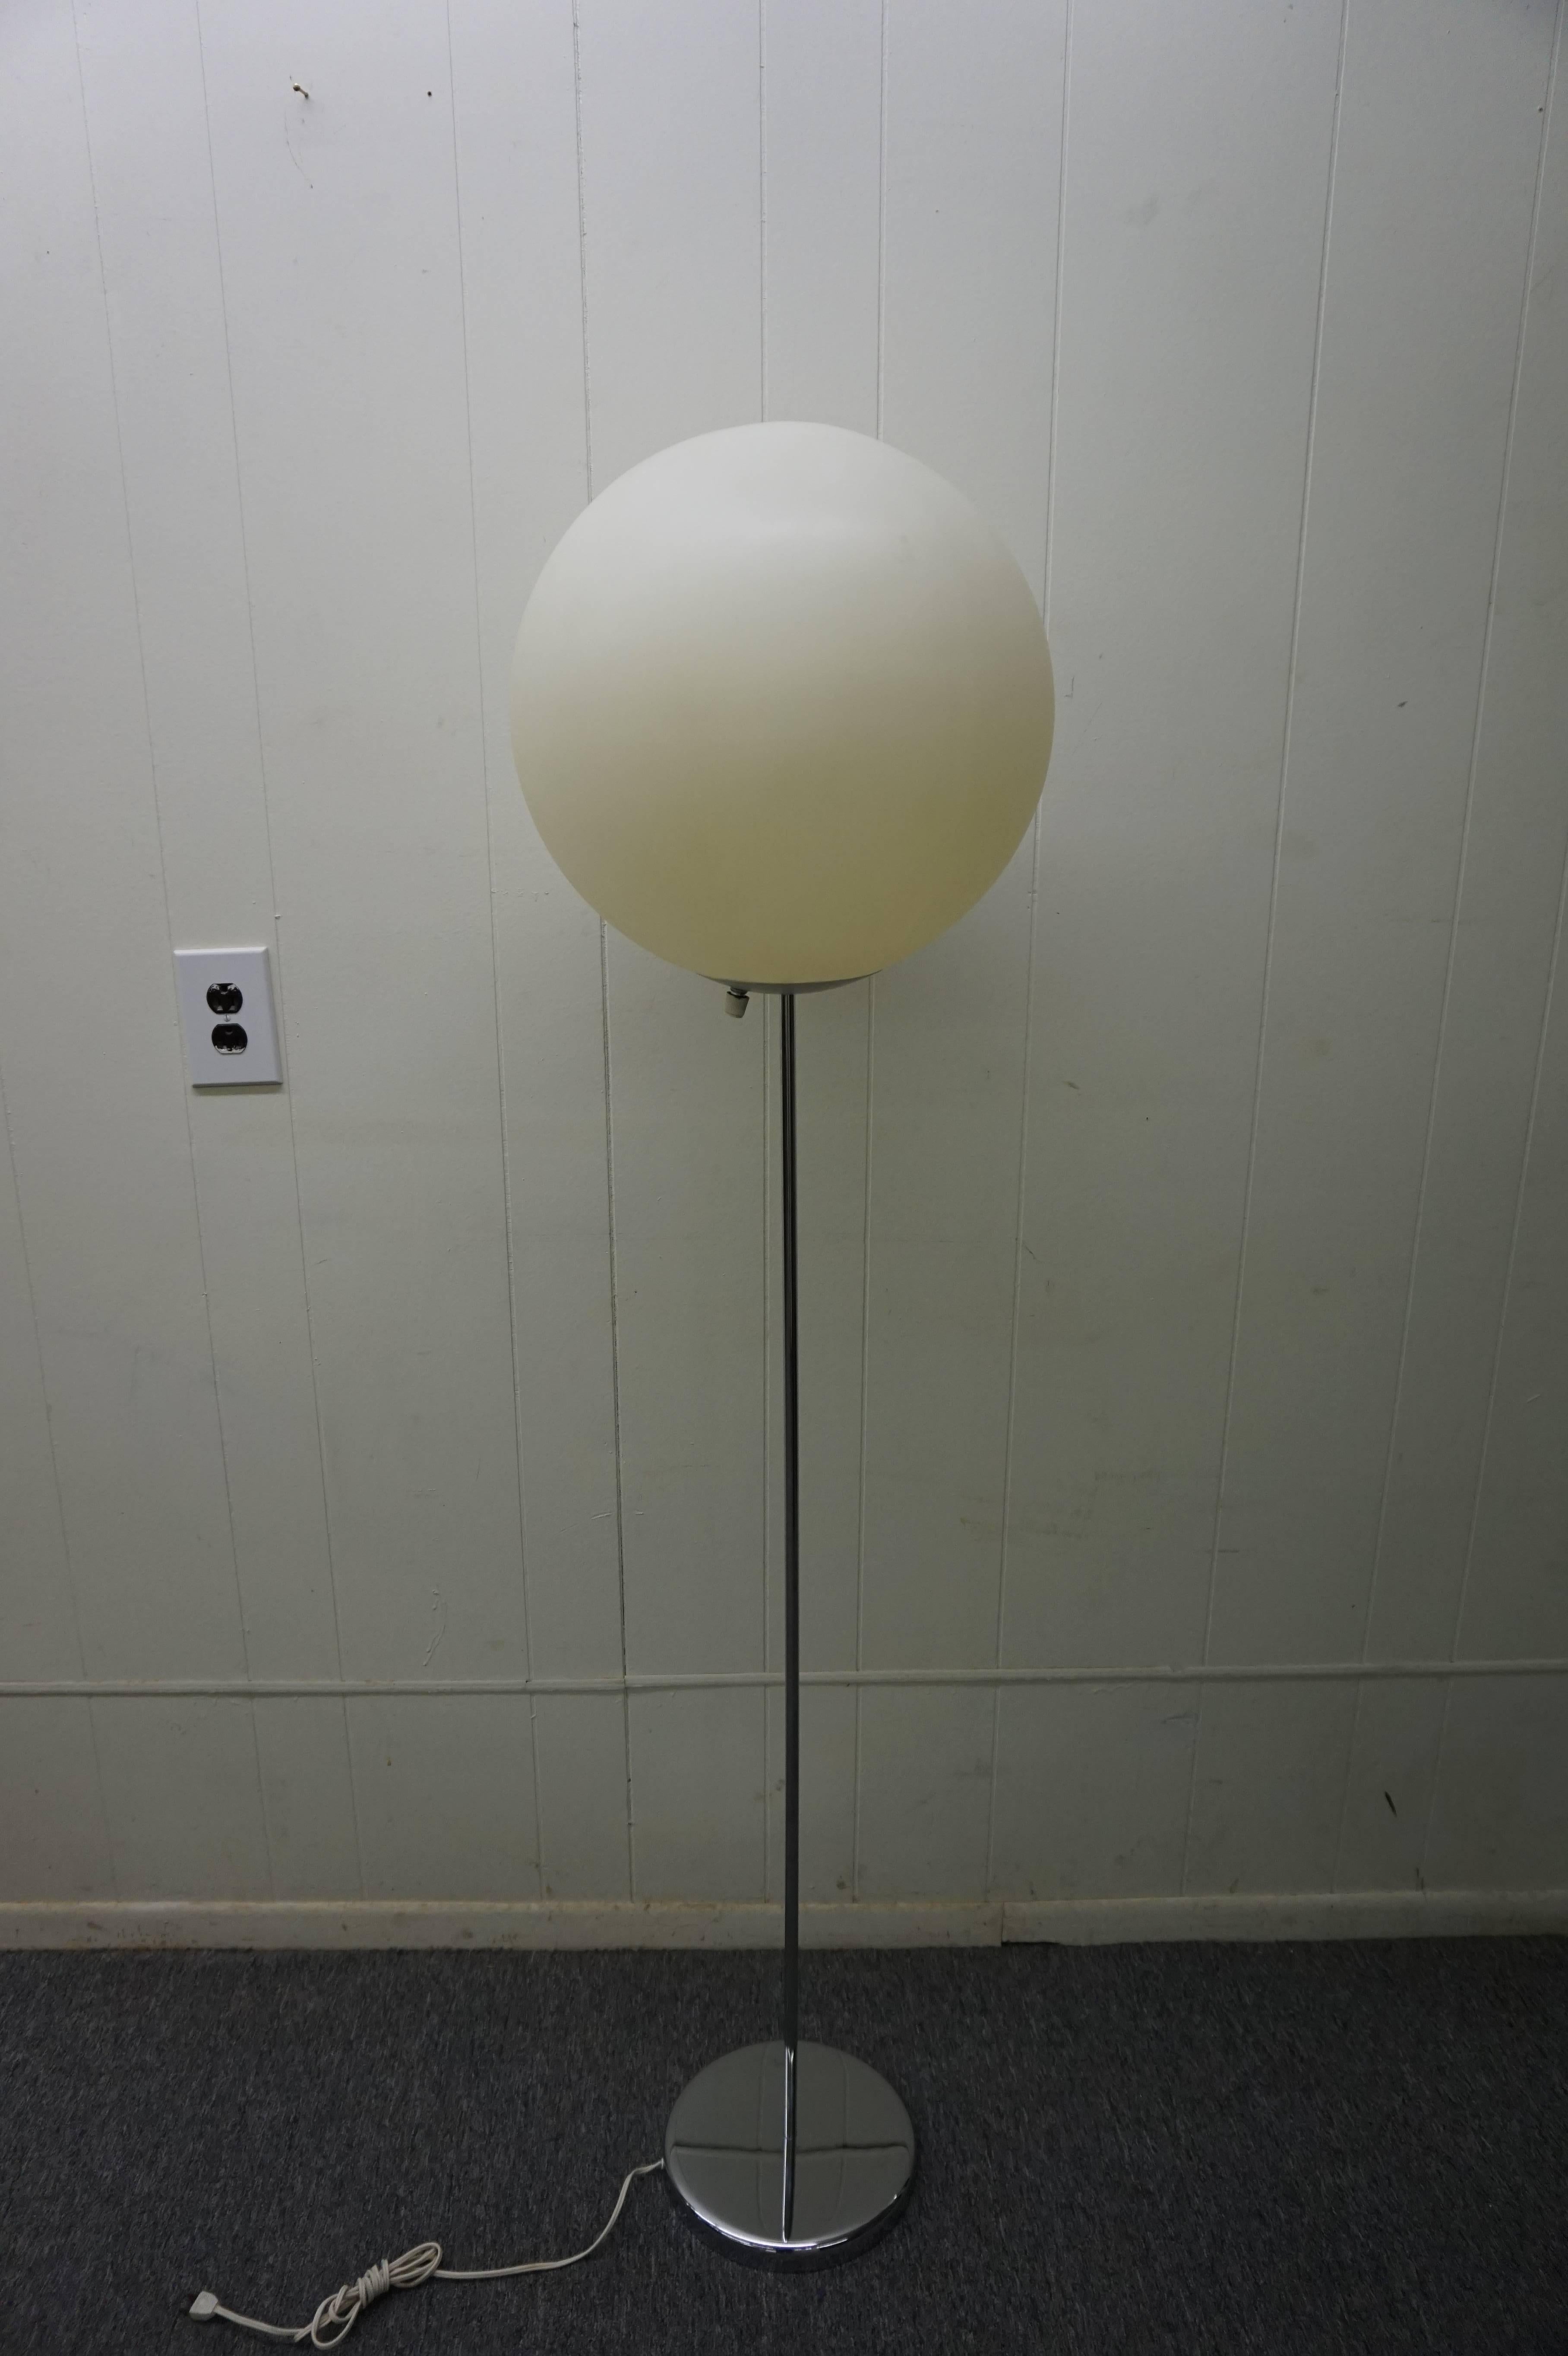 Fun Large Panton Style Ball Globe Floor Lamp with Chrome Base In Good Condition For Sale In Pemberton, NJ